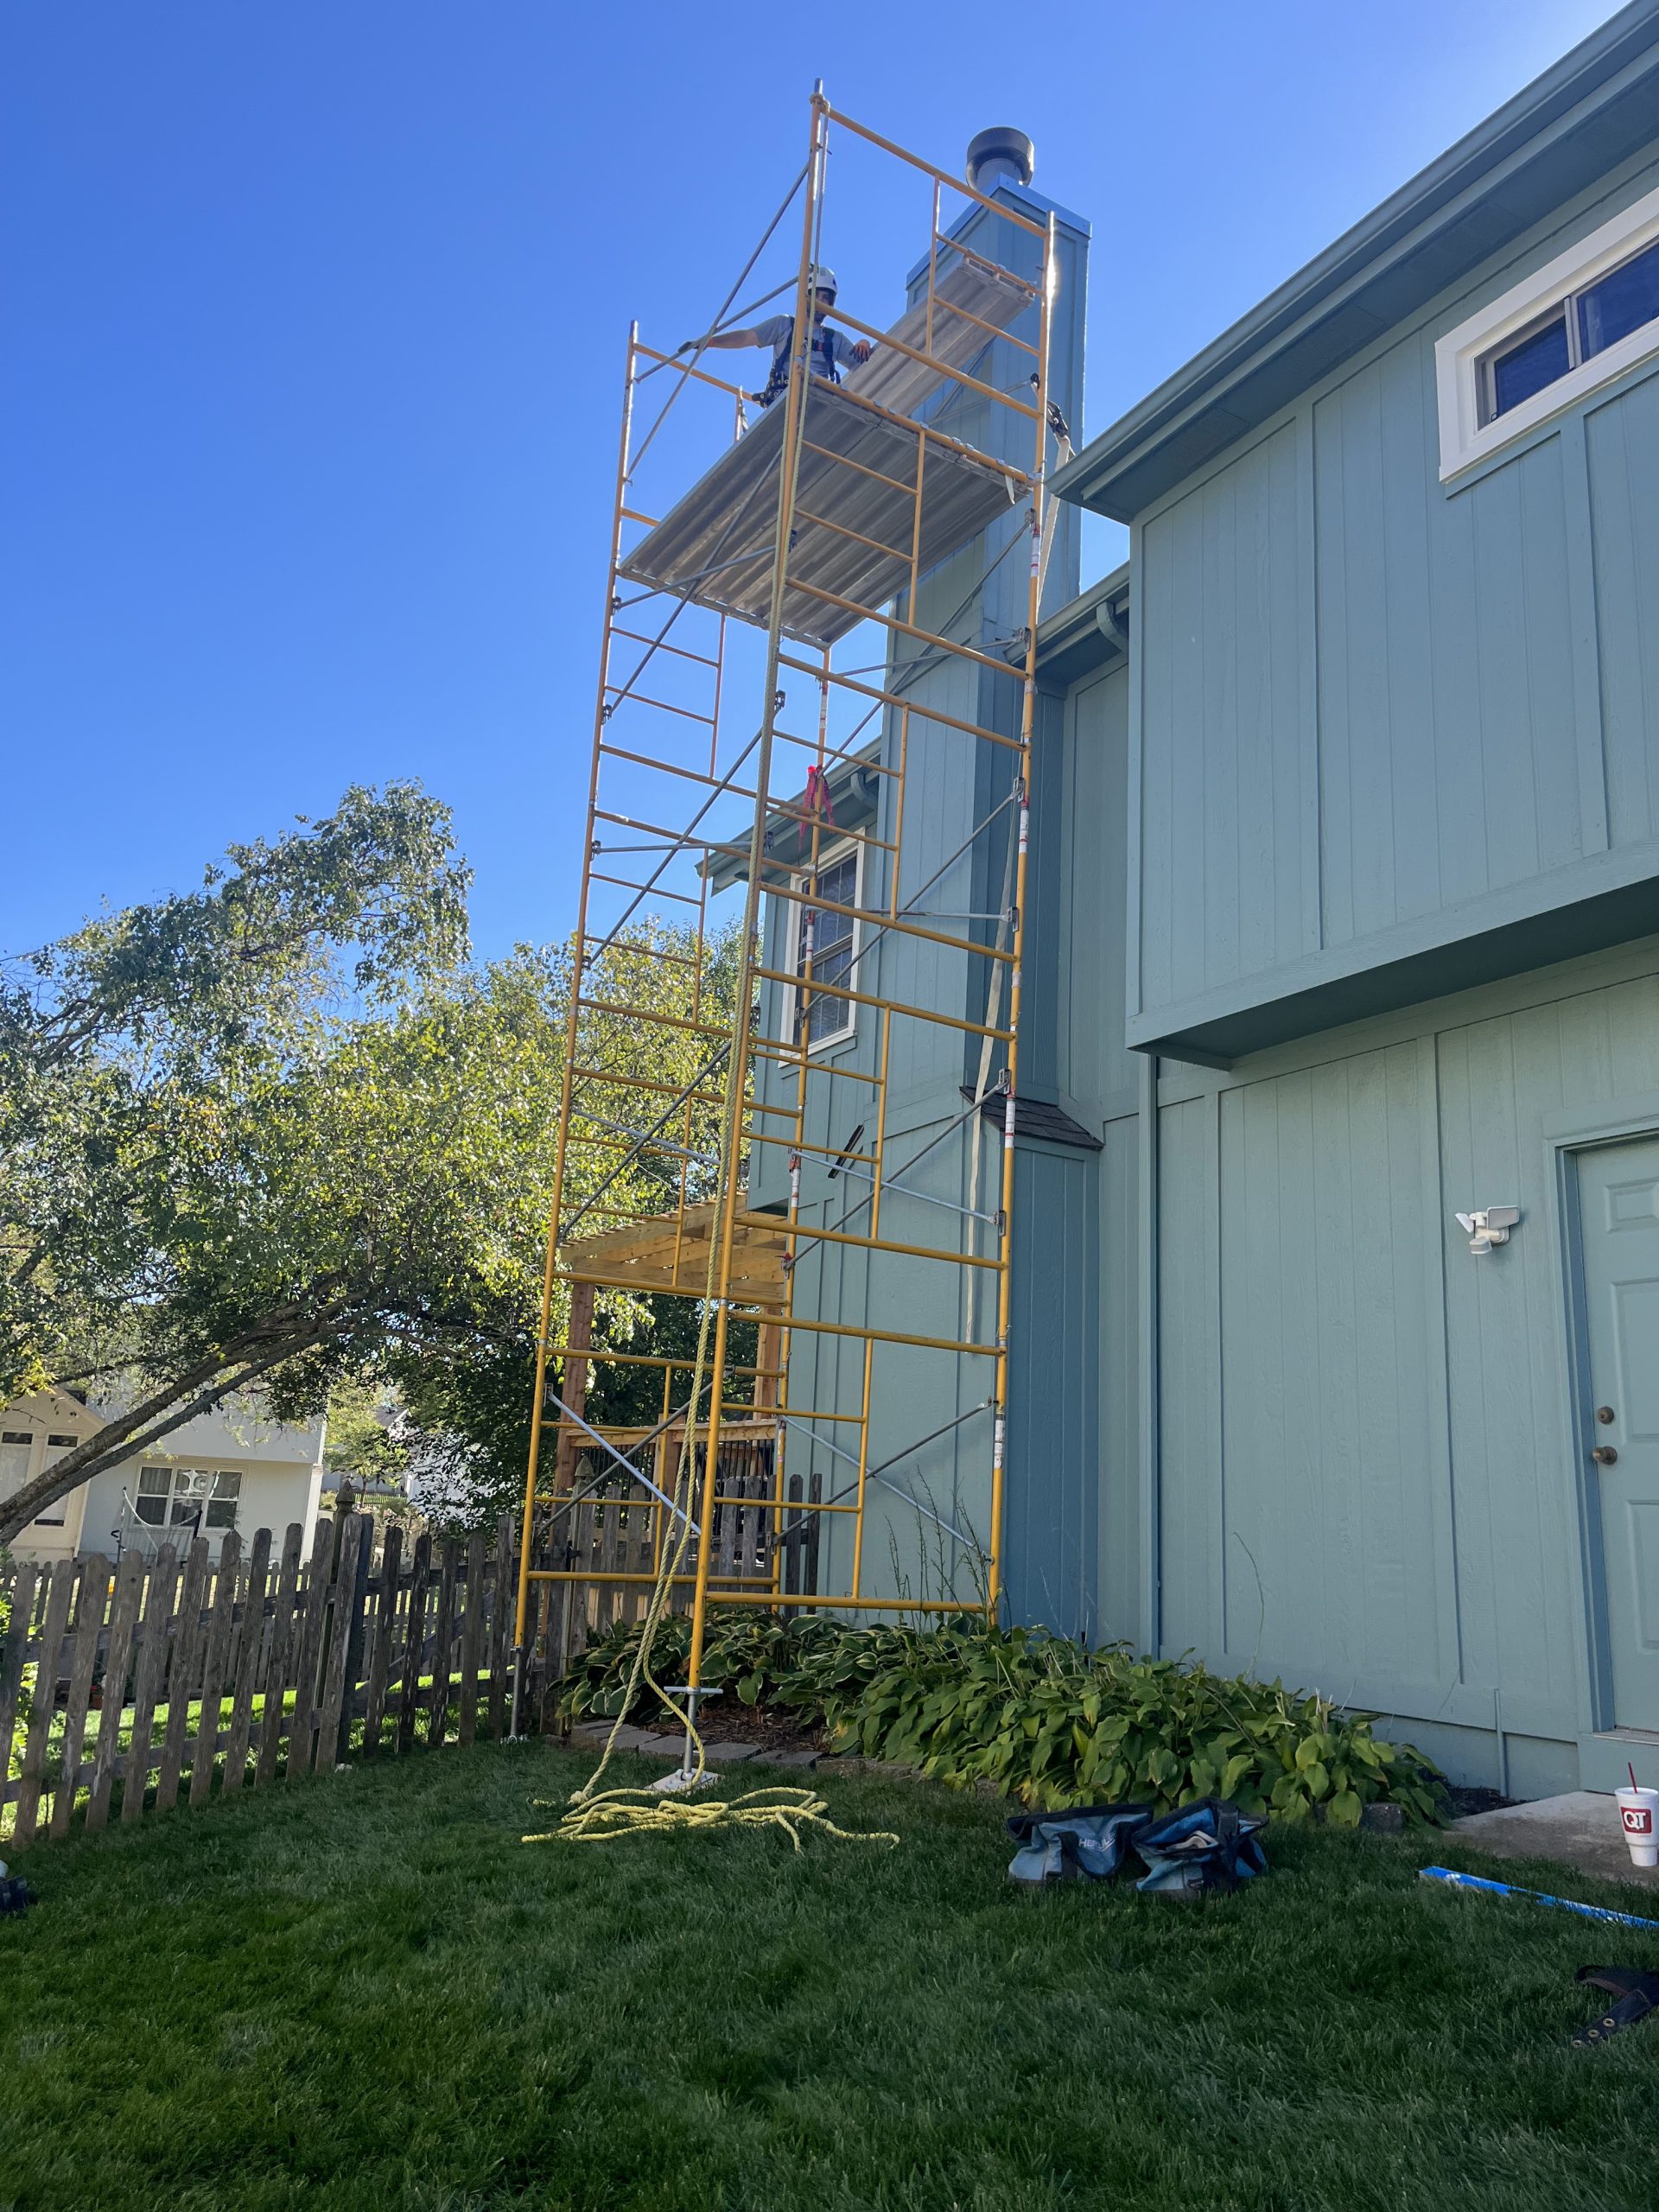 Repairing Chimney Chase with scaffolding on 2 story home in Kansas City